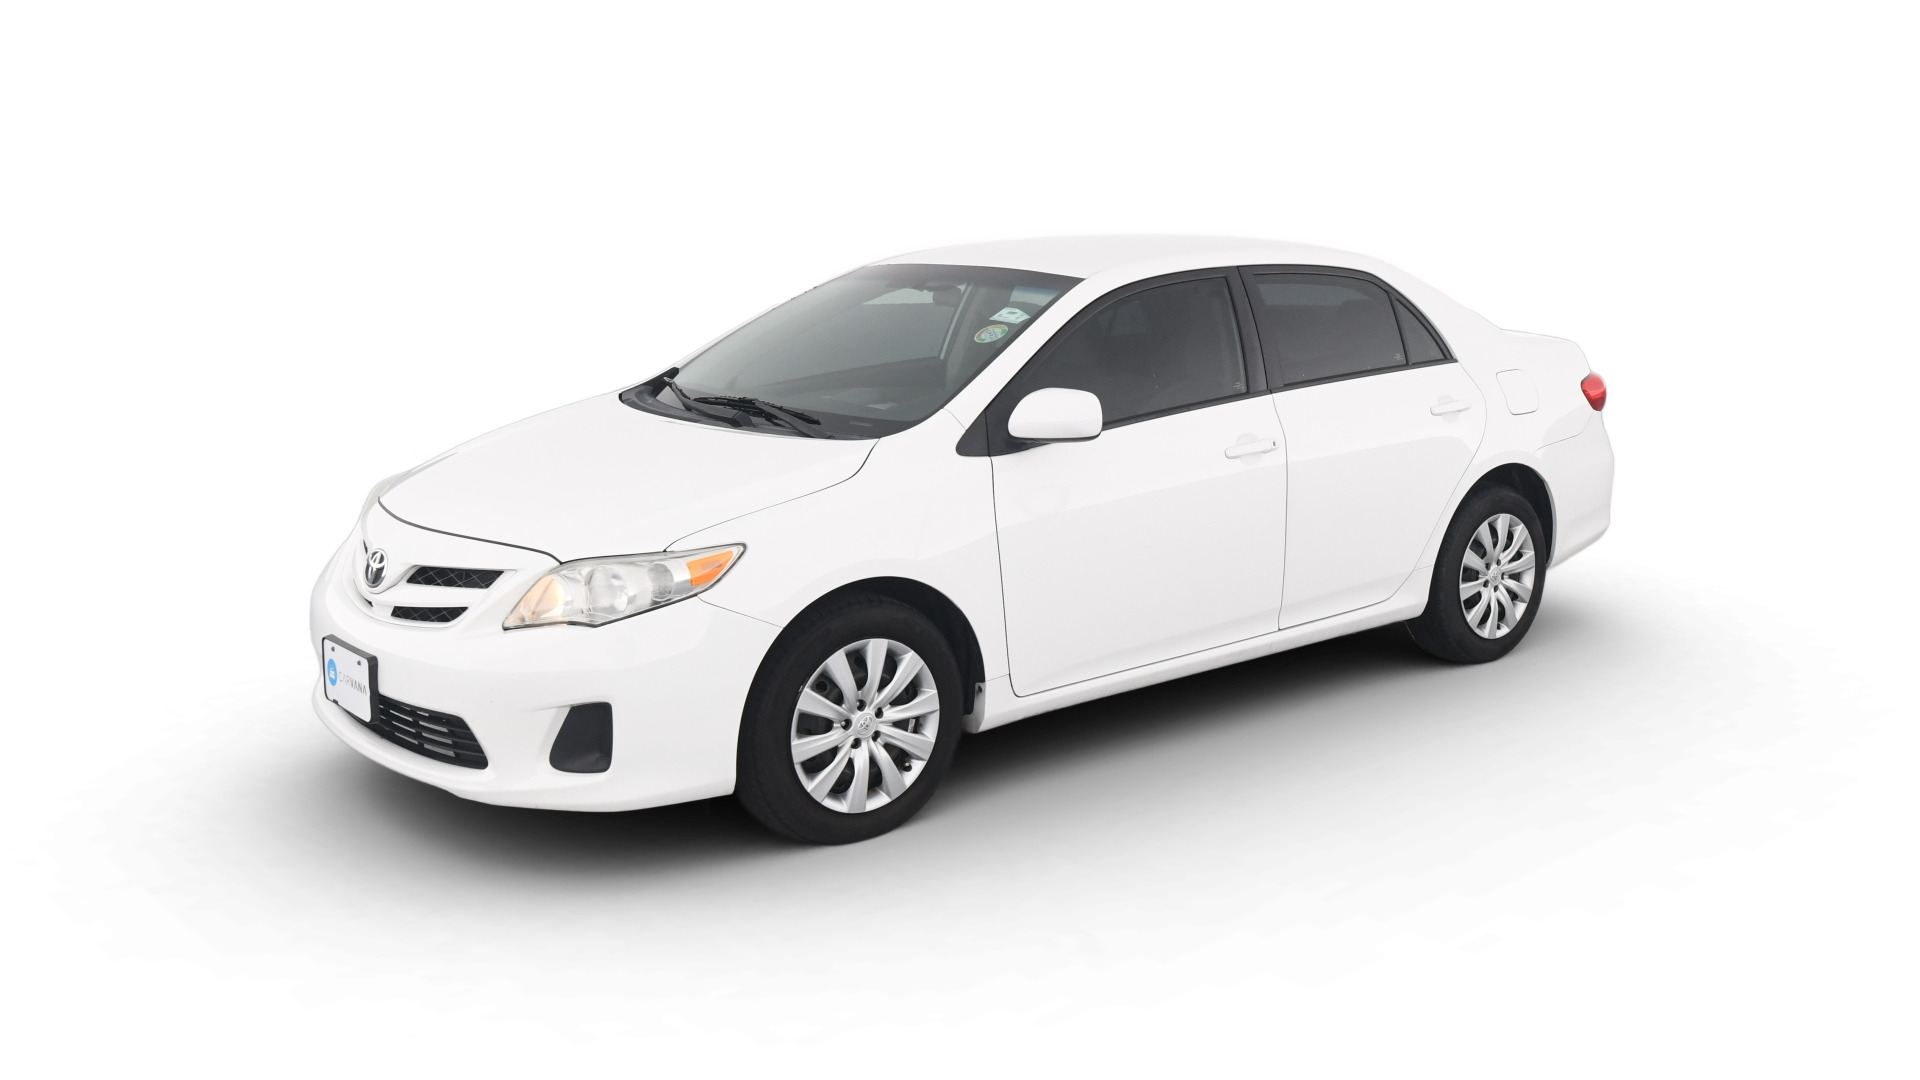 Used 2012 Toyota For Sale Online | Carvana